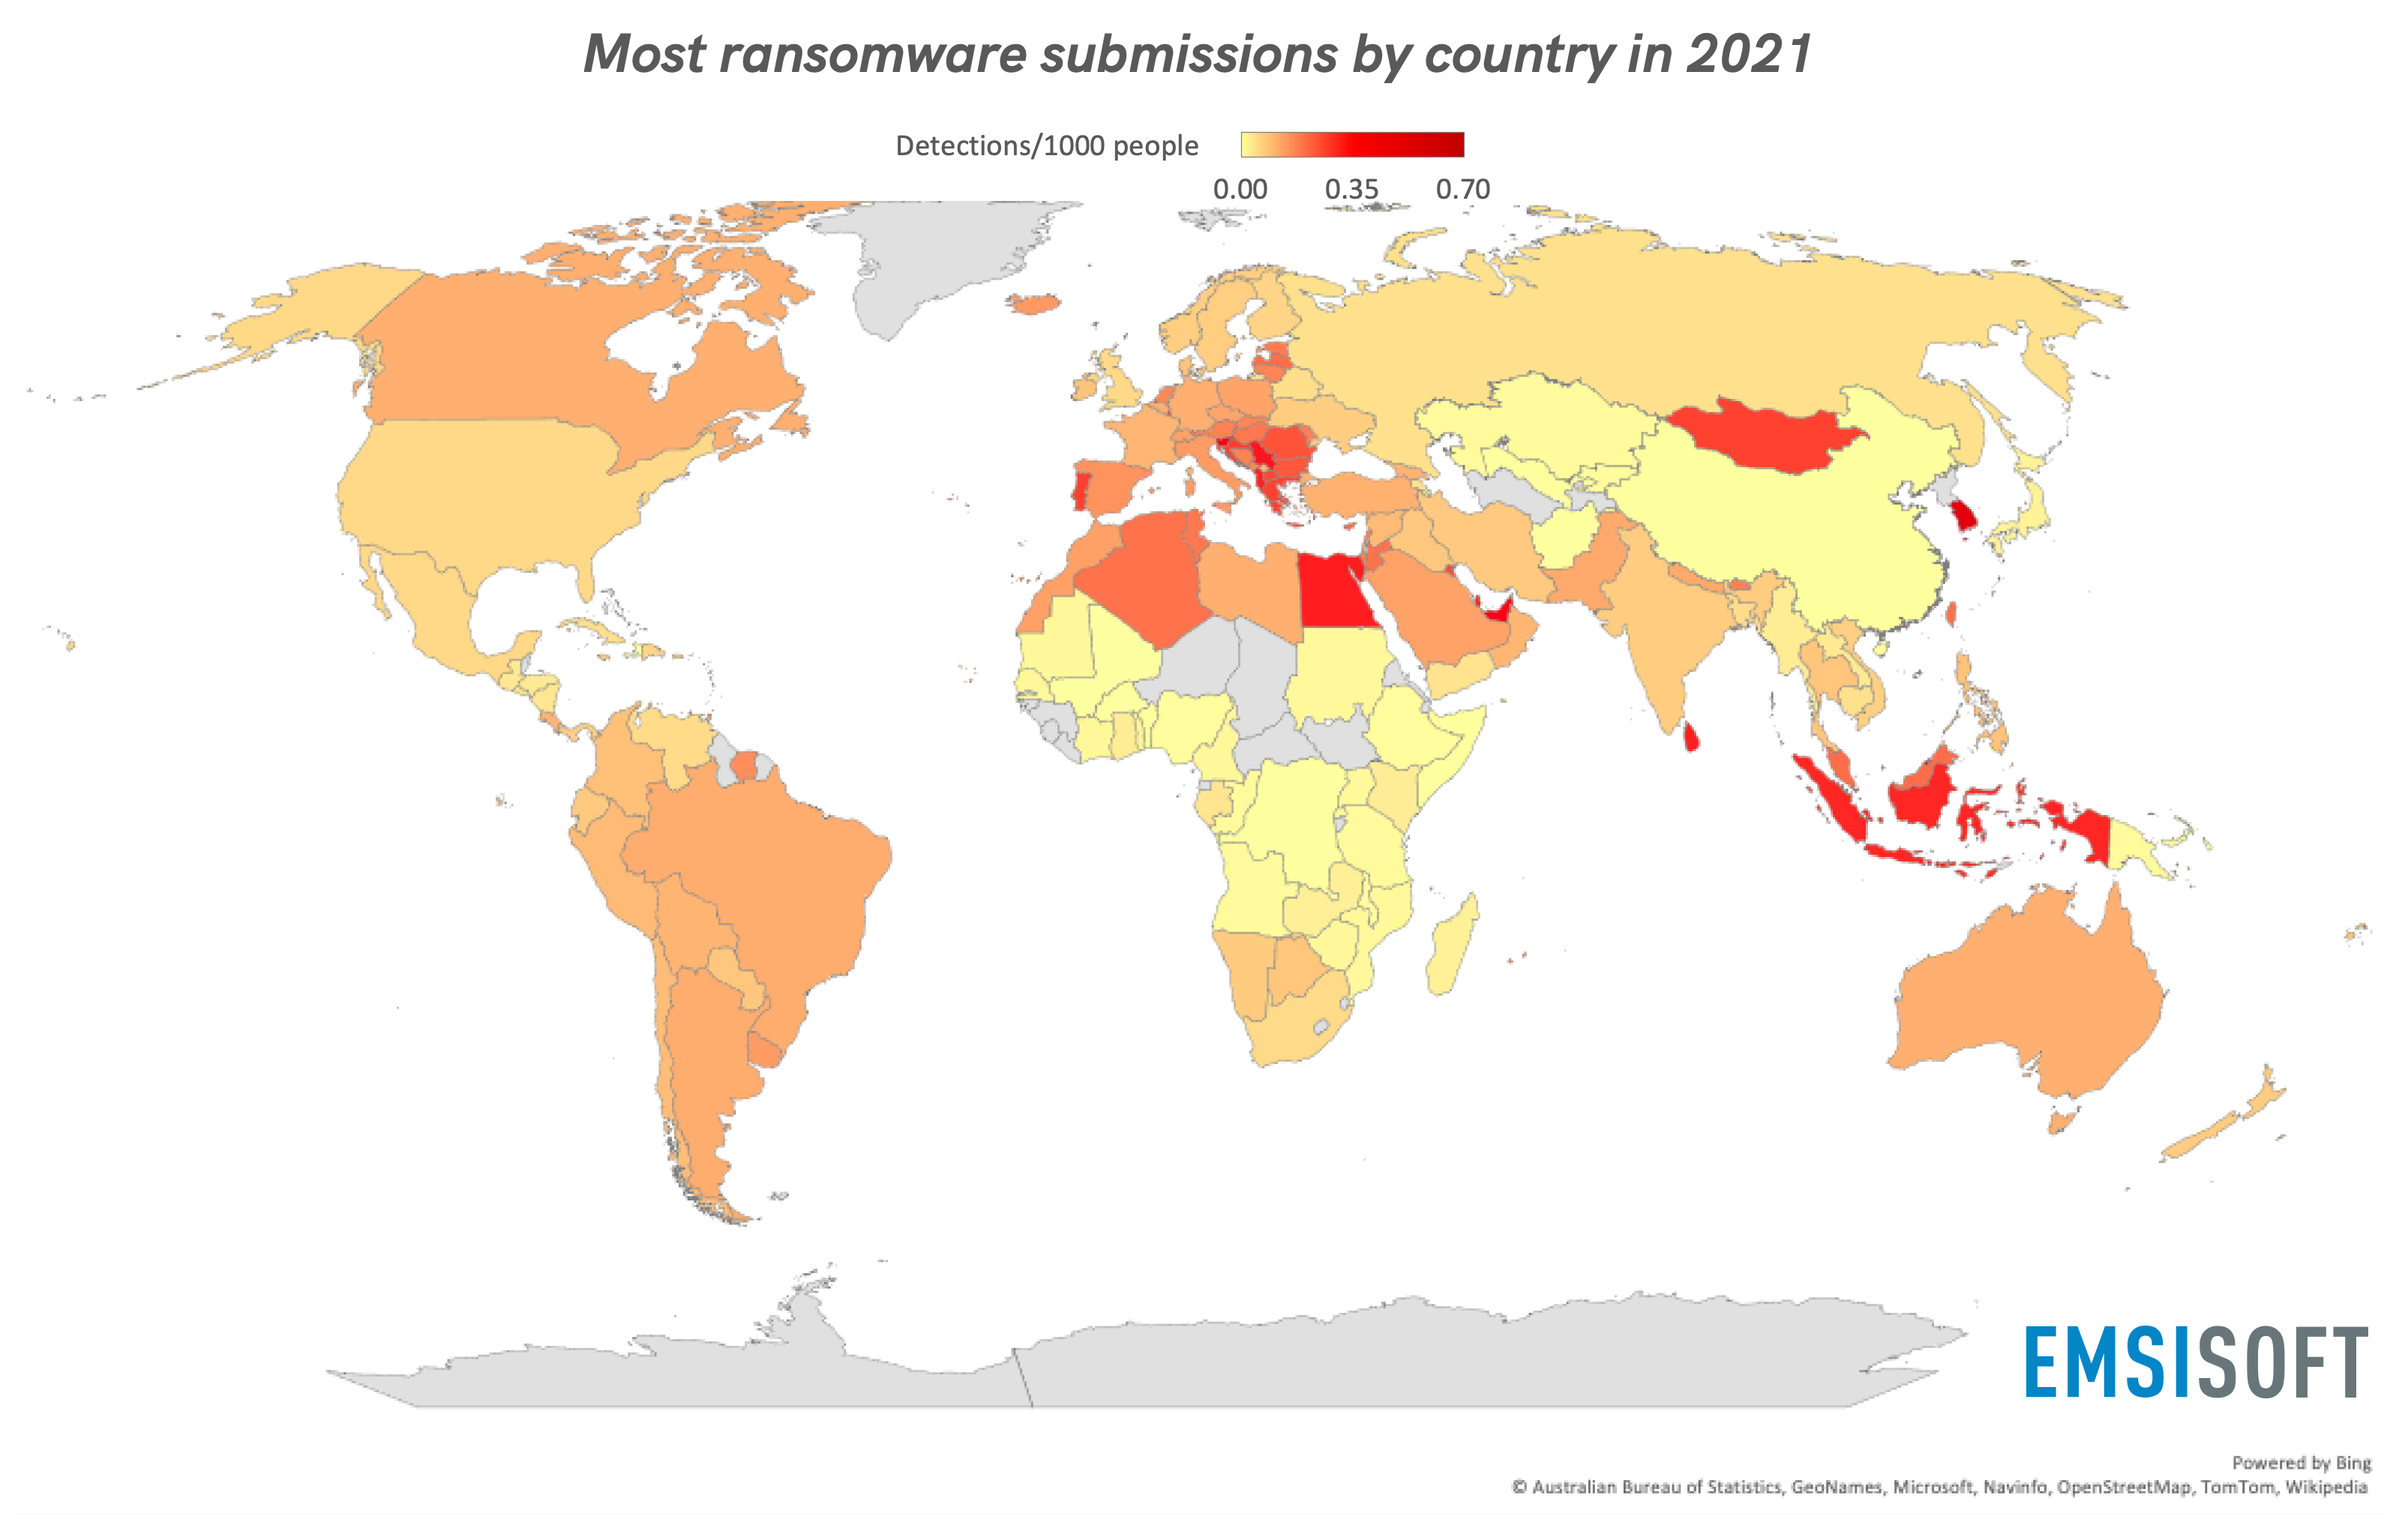 Most ransomware submissions by country in 2021